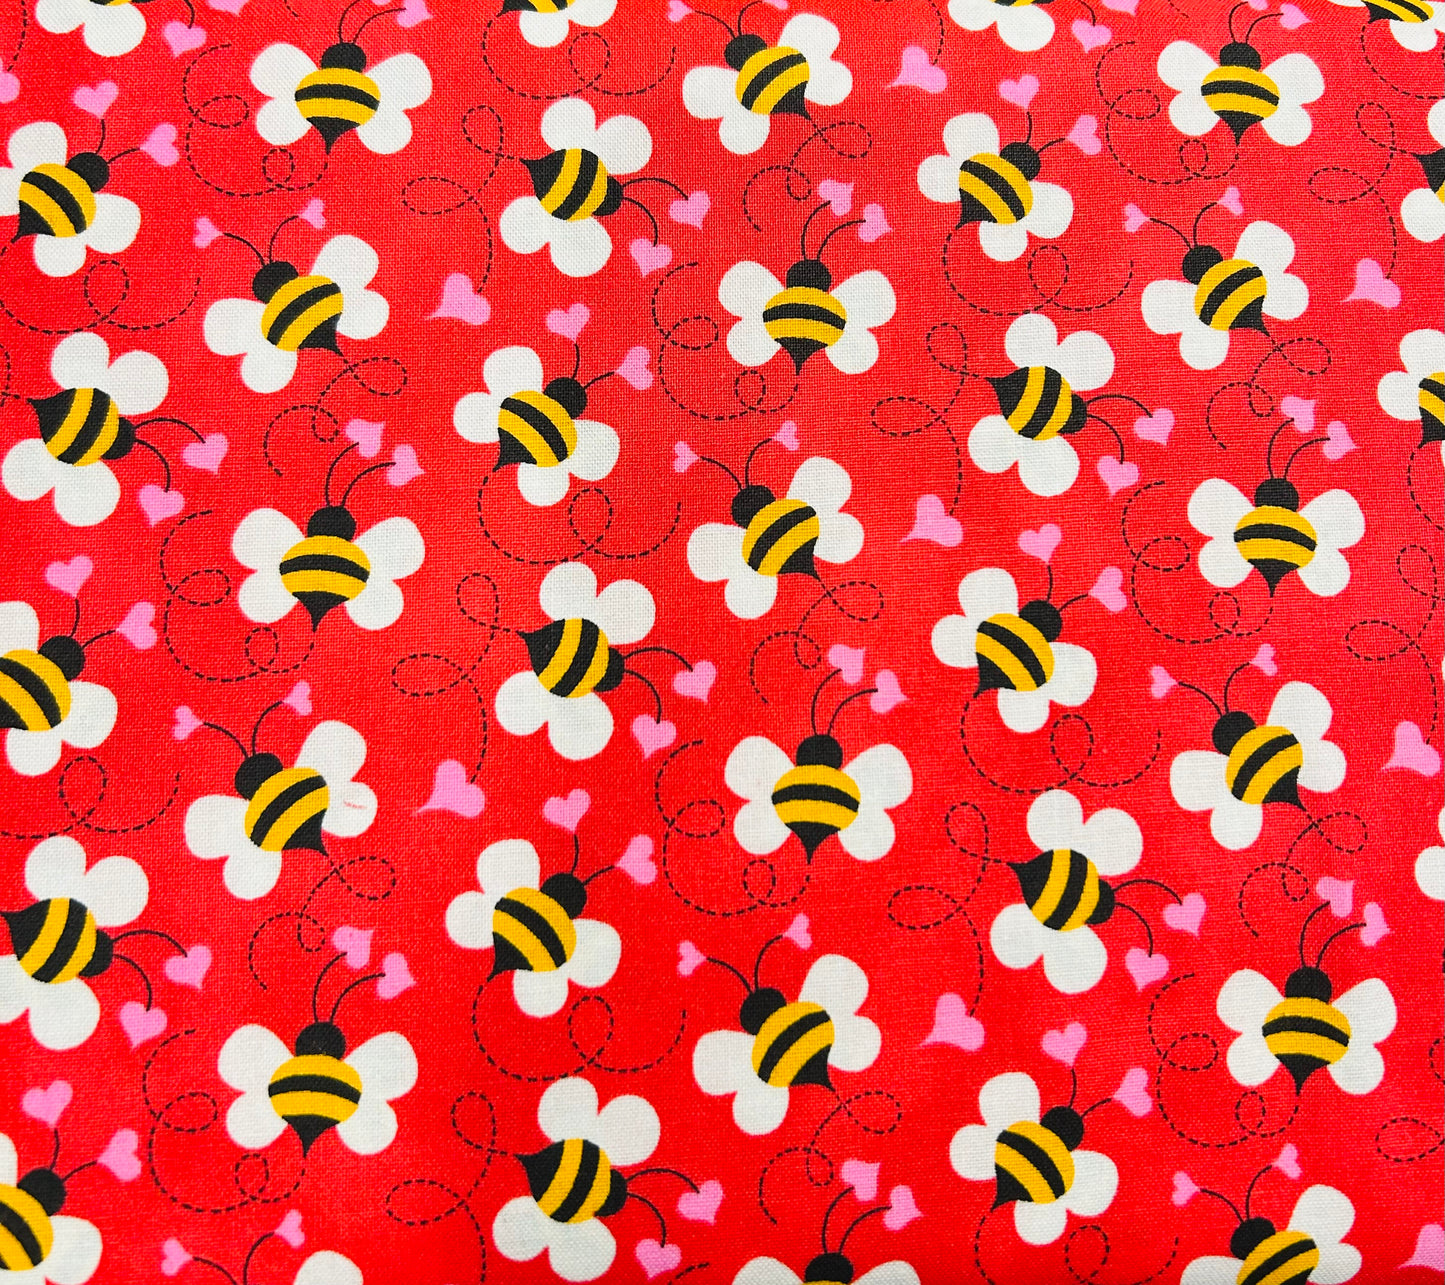 Potholder Set - Bee Themed - Bees on Pink